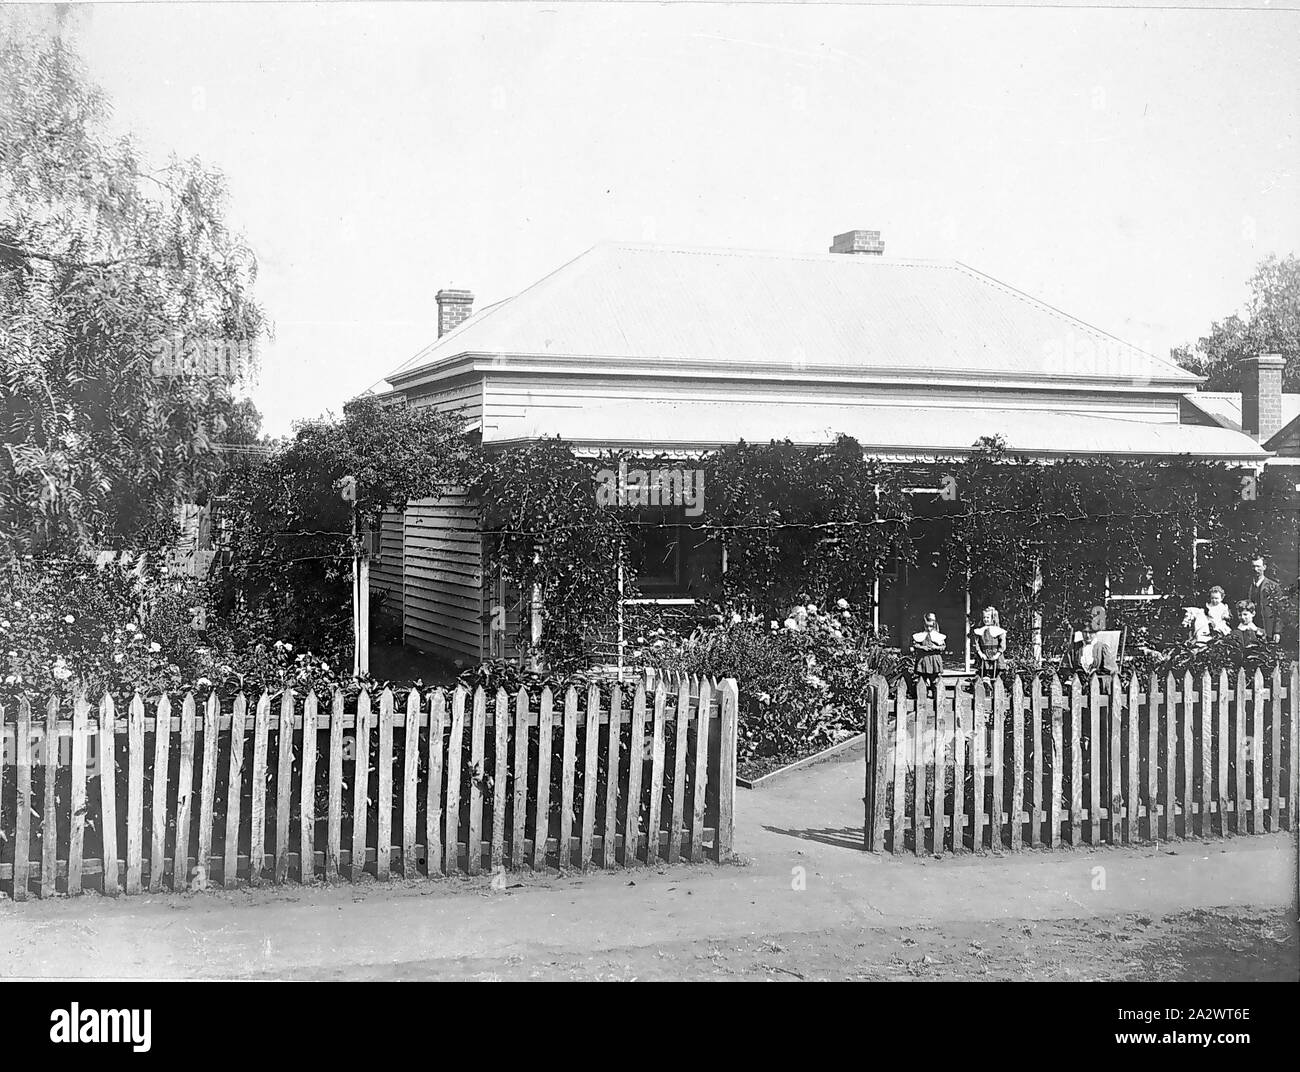 Negative - Bode Family in Front of their Home, Kerang, Victoria, circa 1909, Black and white image of the Bode family in front of their home in Kerang, Victoria, about 1909-1910. The family is pictured, left to right: standing on the path Esther May Bode and Edith Lavinia Bode; their mother Mary Jane Bode (nee Morrison) seated; Leslie Bode on rocking horse; Victor Bode; and their father Albert Bode Stock Photo